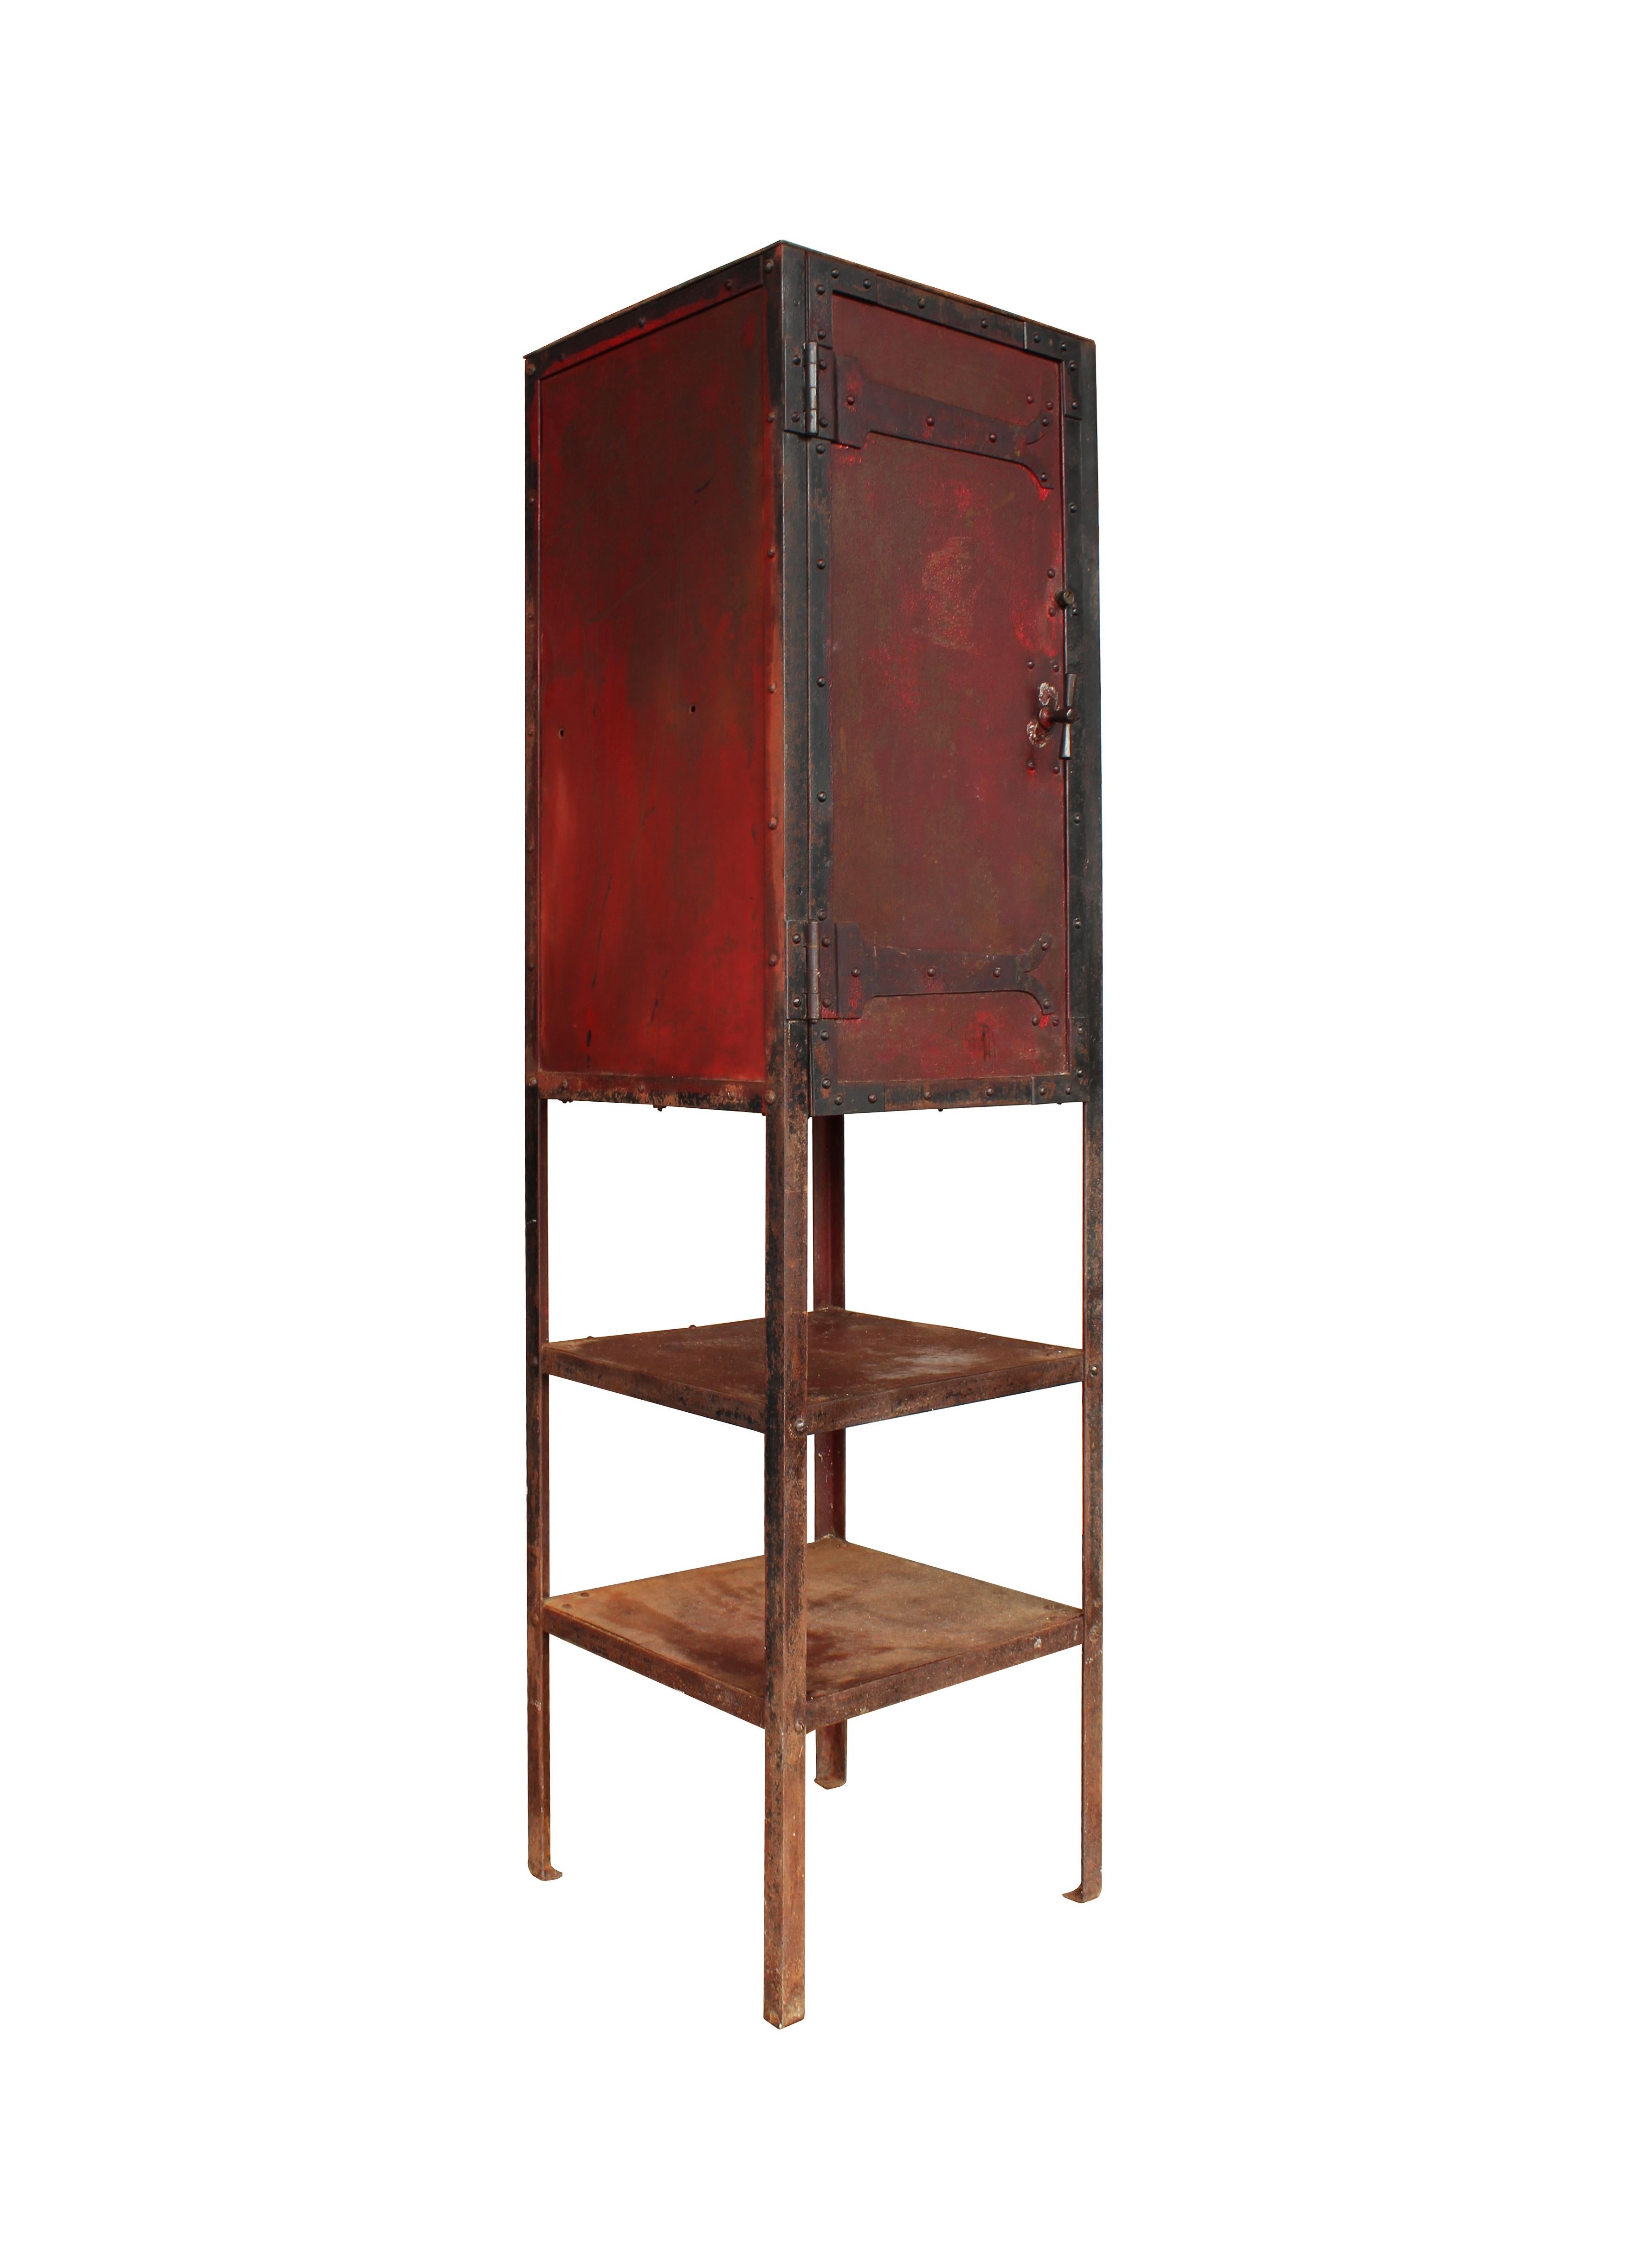 This unusual freestanding Industrial cabinet is comprised of a cast iron base, steel sides featuring roughly texture red paint, and hand-forged iron T-hinges. The hinges themselves are unique in their decorative ends, which add character and beauty